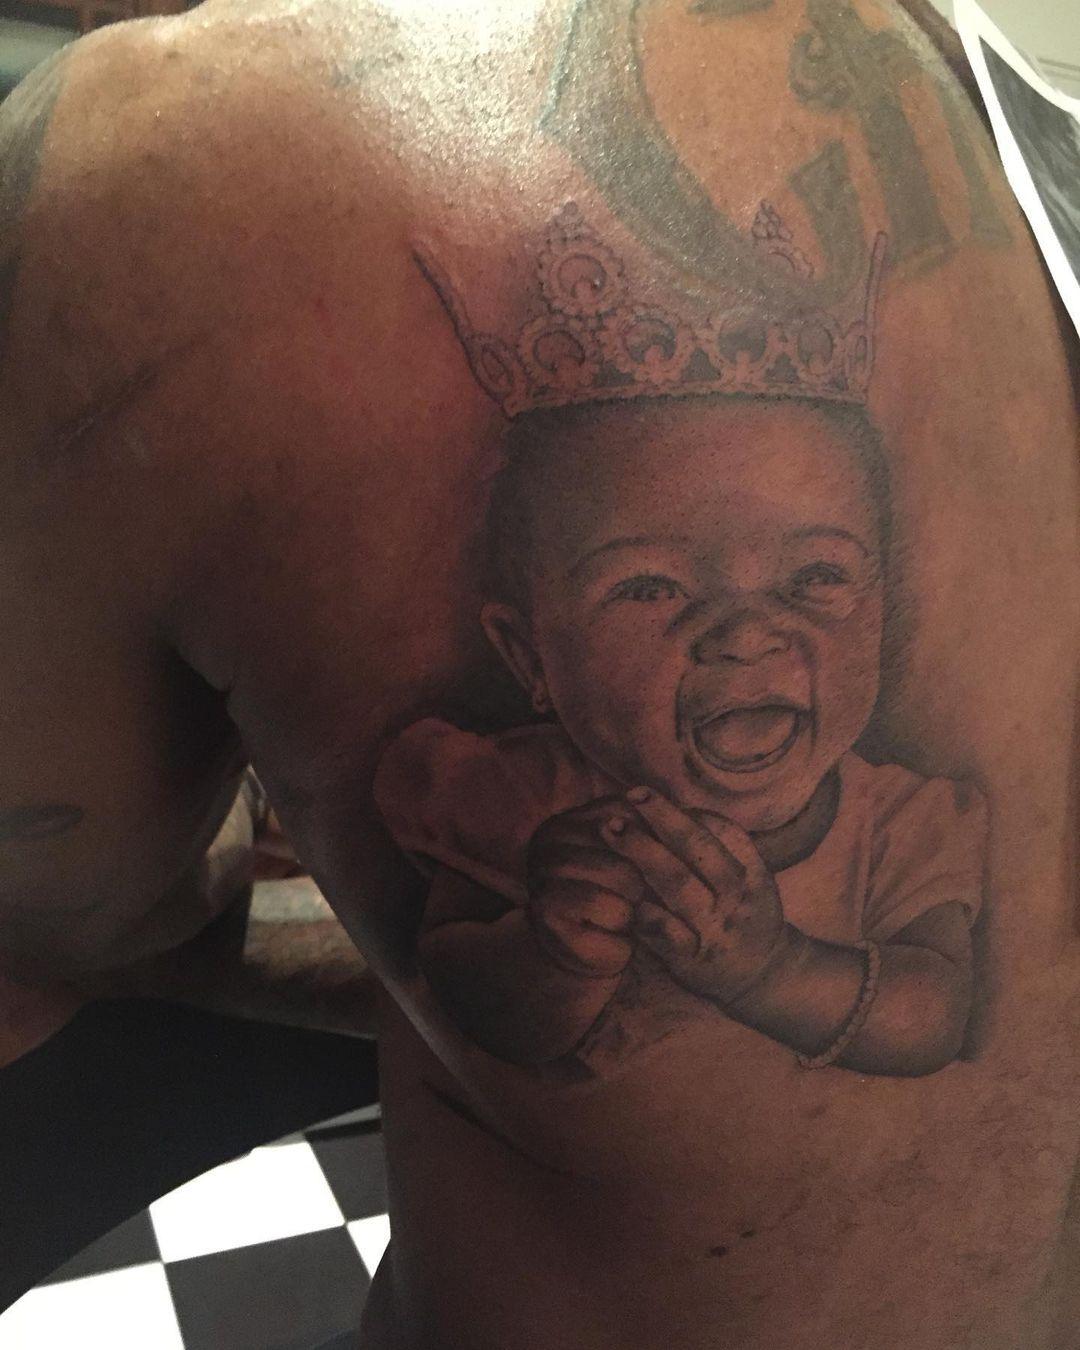 LeBron James' tattoo of his daughter